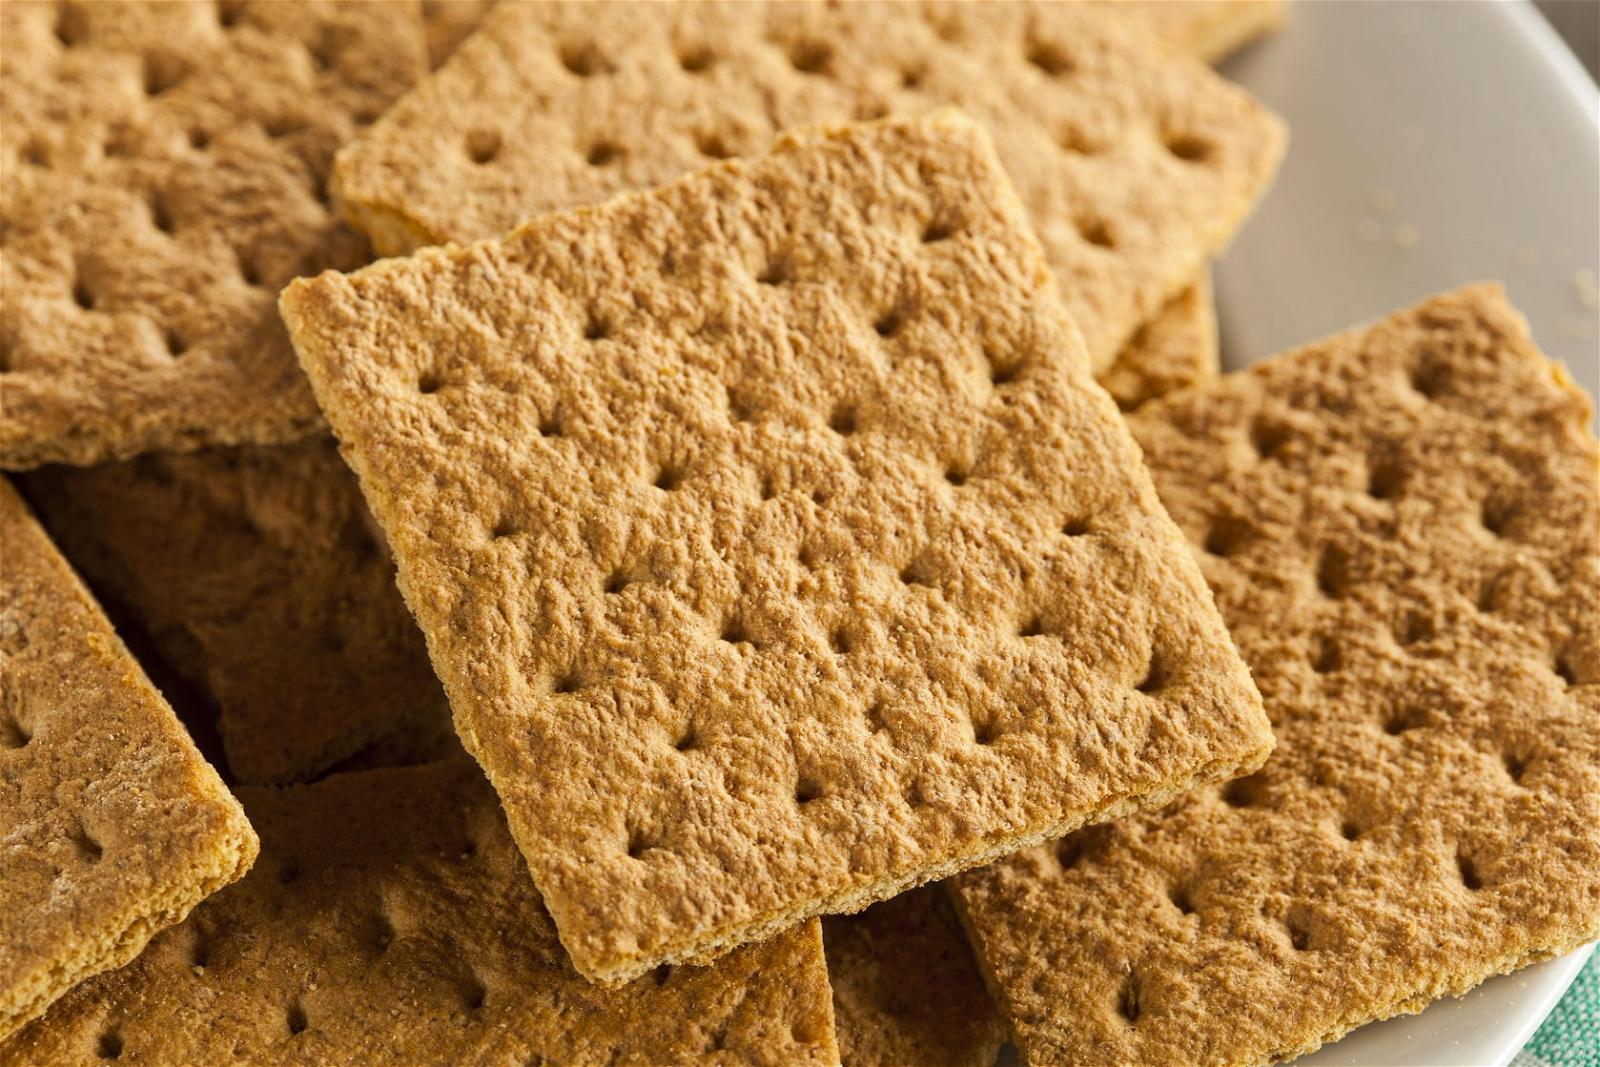 The Shelf Life of Graham Crackers: How Long Do They Last?